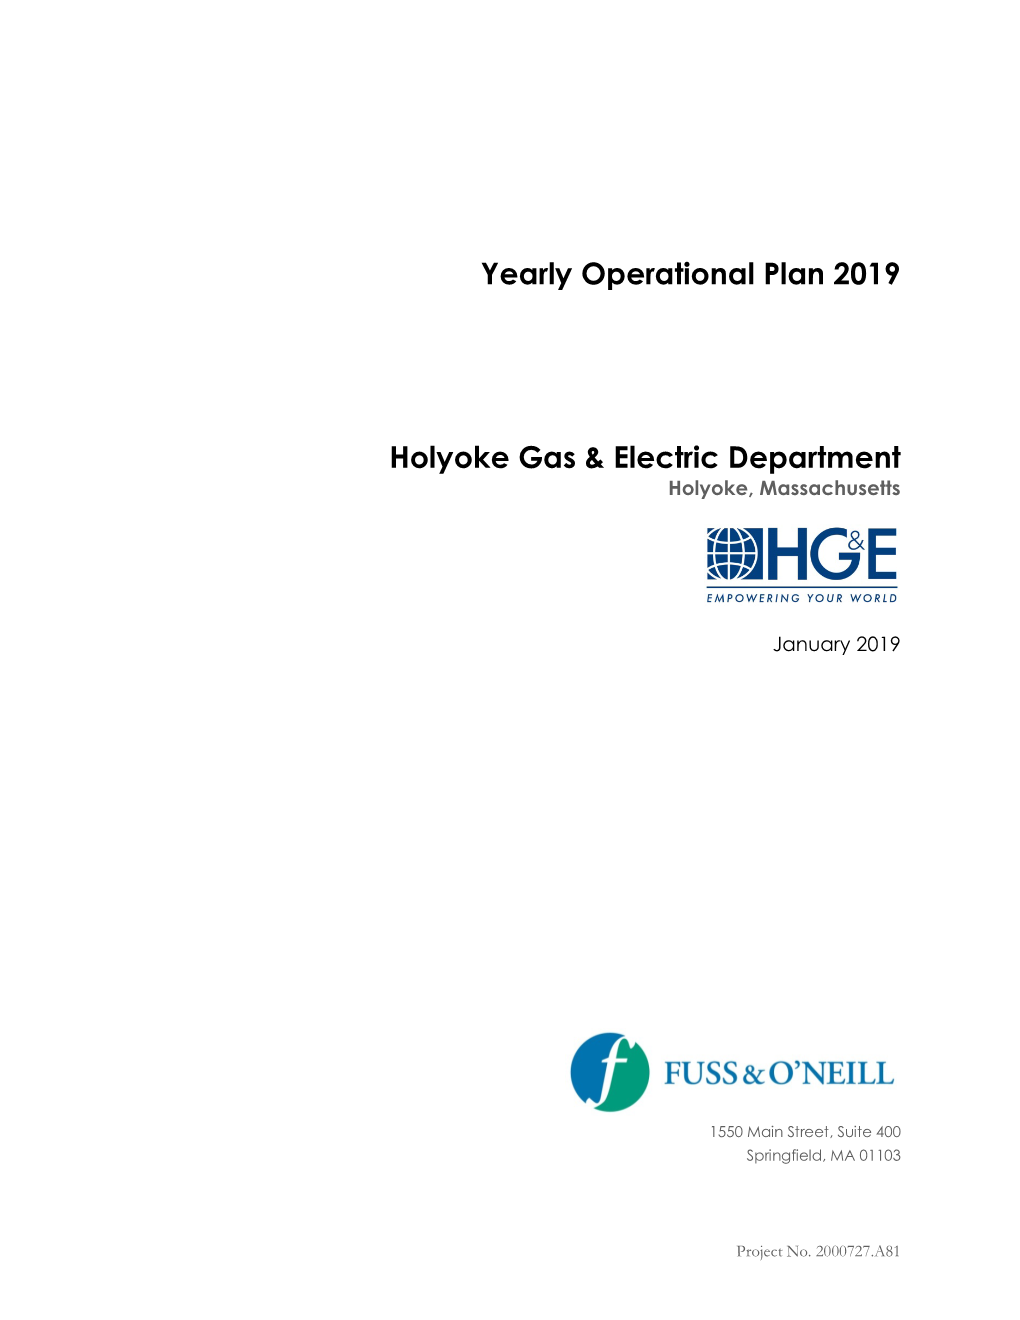 Yearly Operational Plan 2019 Holyoke Gas & Electric Department